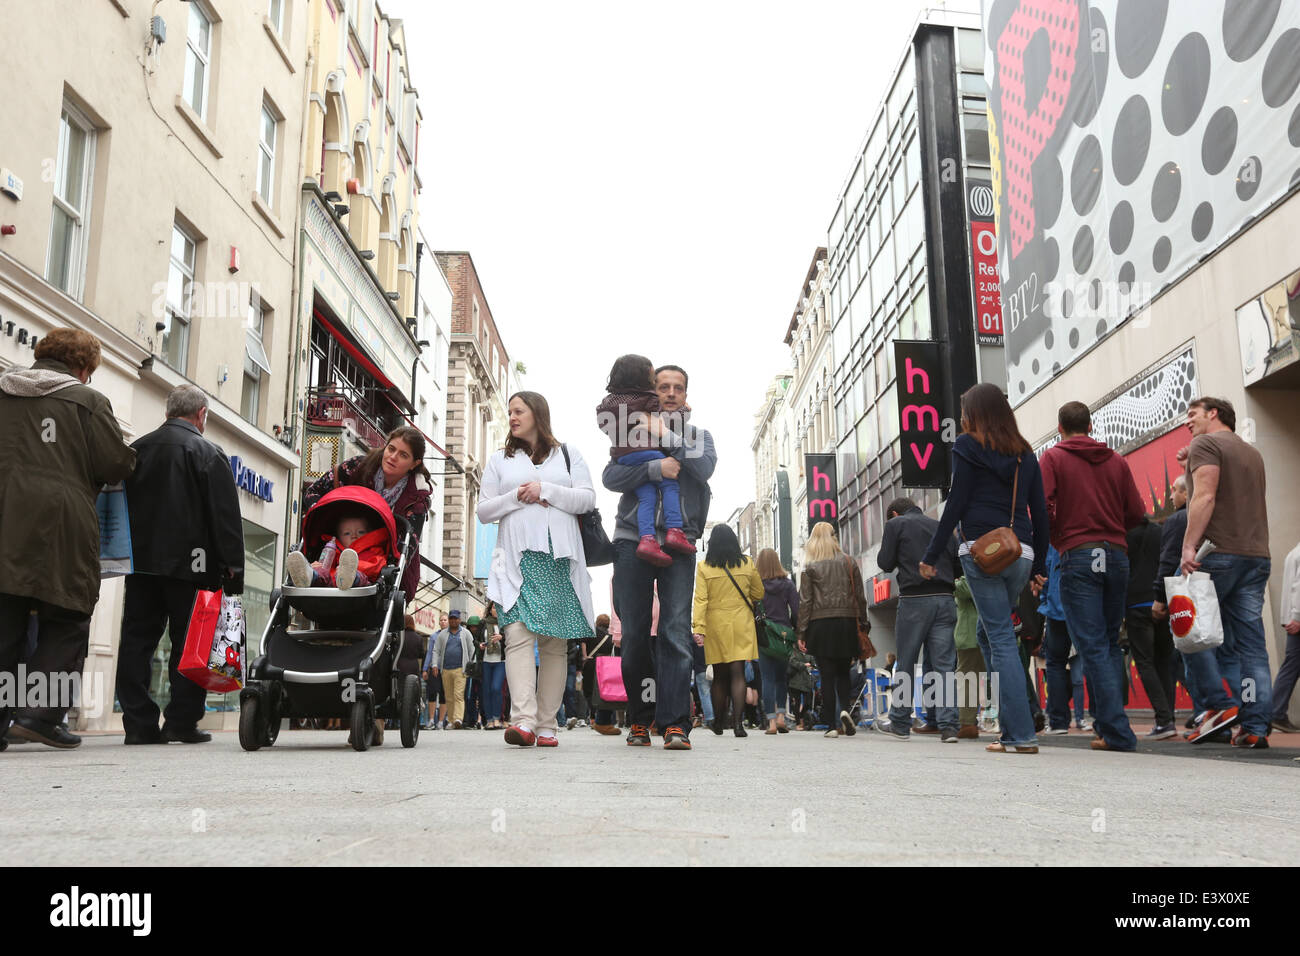 People walk on the new granite pavement of Grafton Street in Dublin city centre during a busy shopping period Stock Photo